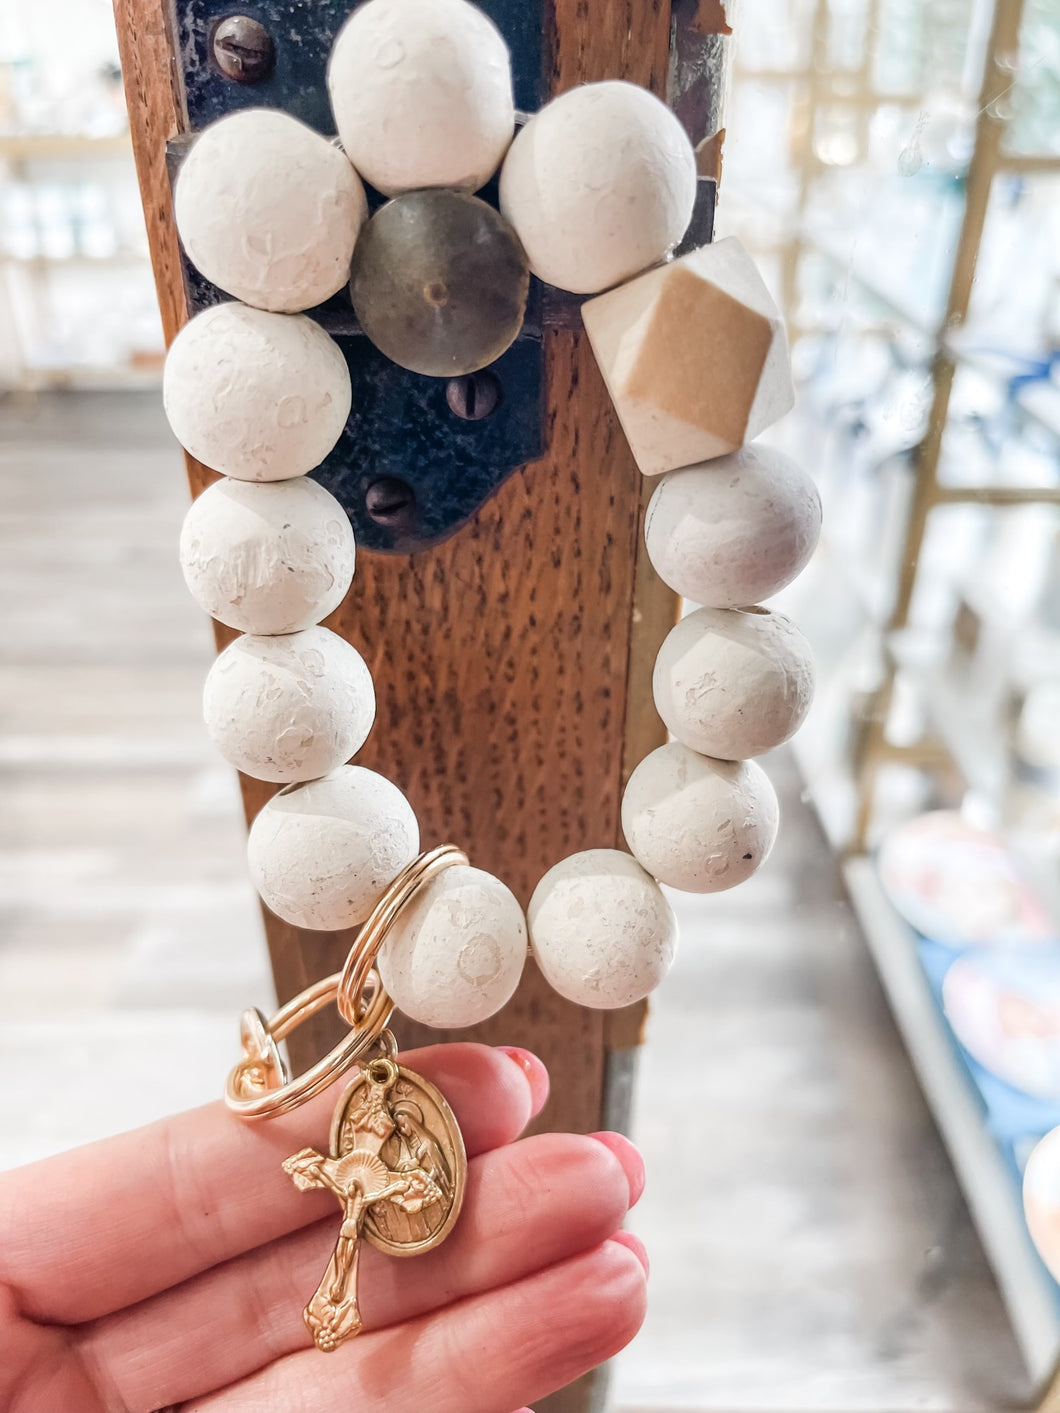 Rustic white and natural wood bead wristlet keychain the holy family pendant and crucifix-Stretched Out Designs By Chelse Breaux